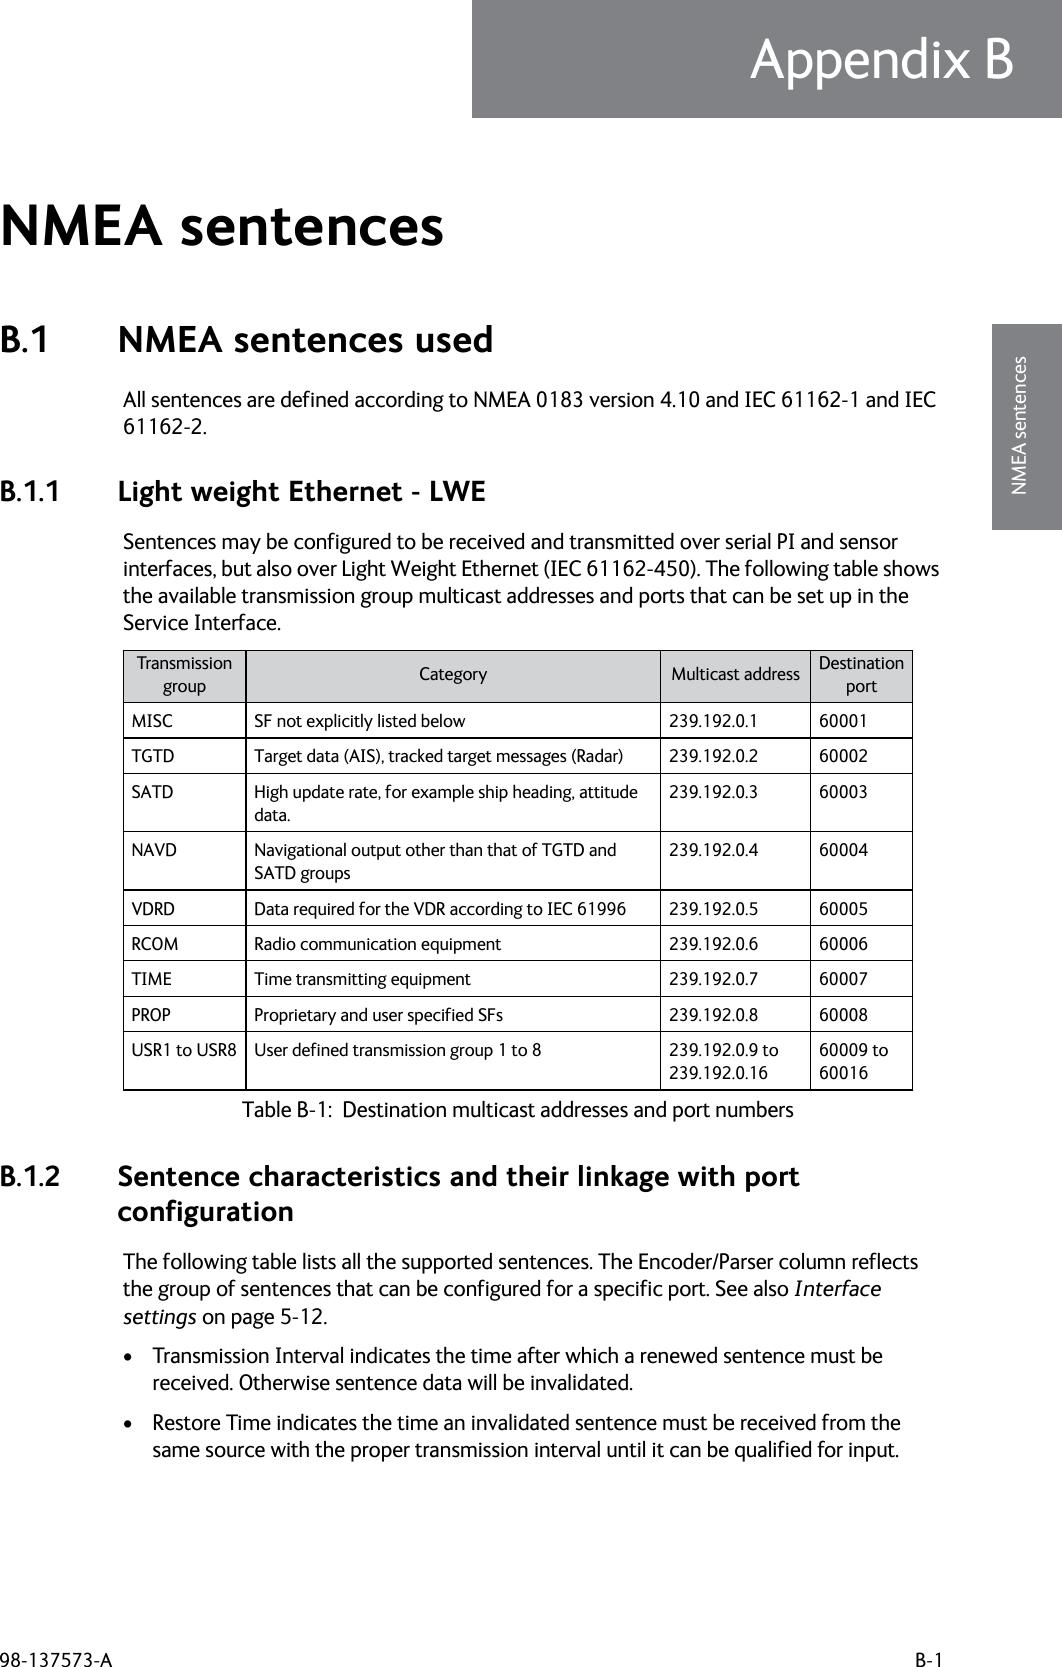 98-137573-A B-1Appendix BBBBBNMEA sentencesNMEA sentences BB.1 NMEA sentences usedAll sentences are defined according to NMEA 0183 version 4.10 and IEC 61162-1 and IEC 61162-2. B.1.1 Light weight Ethernet - LWESentences may be configured to be received and transmitted over serial PI and sensor interfaces, but also over Light Weight Ethernet (IEC 61162-450). The following table shows the available transmission group multicast addresses and ports that can be set up in the Service Interface.B.1.2 Sentence characteristics and their linkage with port configurationThe following table lists all the supported sentences. The Encoder/Parser column reflects the group of sentences that can be configured for a specific port. See also Interface settings on page 5-12.• Transmission Interval indicates the time after which a renewed sentence must be received. Otherwise sentence data will be invalidated. • Restore Time indicates the time an invalidated sentence must be received from the same source with the proper transmission interval until it can be qualified for input.Transmissiongroup Category Multicast address DestinationportMISC SF not explicitly listed below 239.192.0.1 60001TGTD Target data (AIS), tracked target messages (Radar) 239.192.0.2 60002SATD High update rate, for example ship heading, attitude data.239.192.0.3 60003NAVD Navigational output other than that of TGTD and SATD groups239.192.0.4 60004VDRD Data required for the VDR according to IEC 61996 239.192.0.5 60005RCOM Radio communication equipment 239.192.0.6 60006TIME Time transmitting equipment 239.192.0.7 60007PROP Proprietary and user specified SFs 239.192.0.8 60008USR1 to USR8 User defined transmission group 1 to 8 239.192.0.9 to 239.192.0.1660009 to 60016Table B-1:  Destination multicast addresses and port numbers